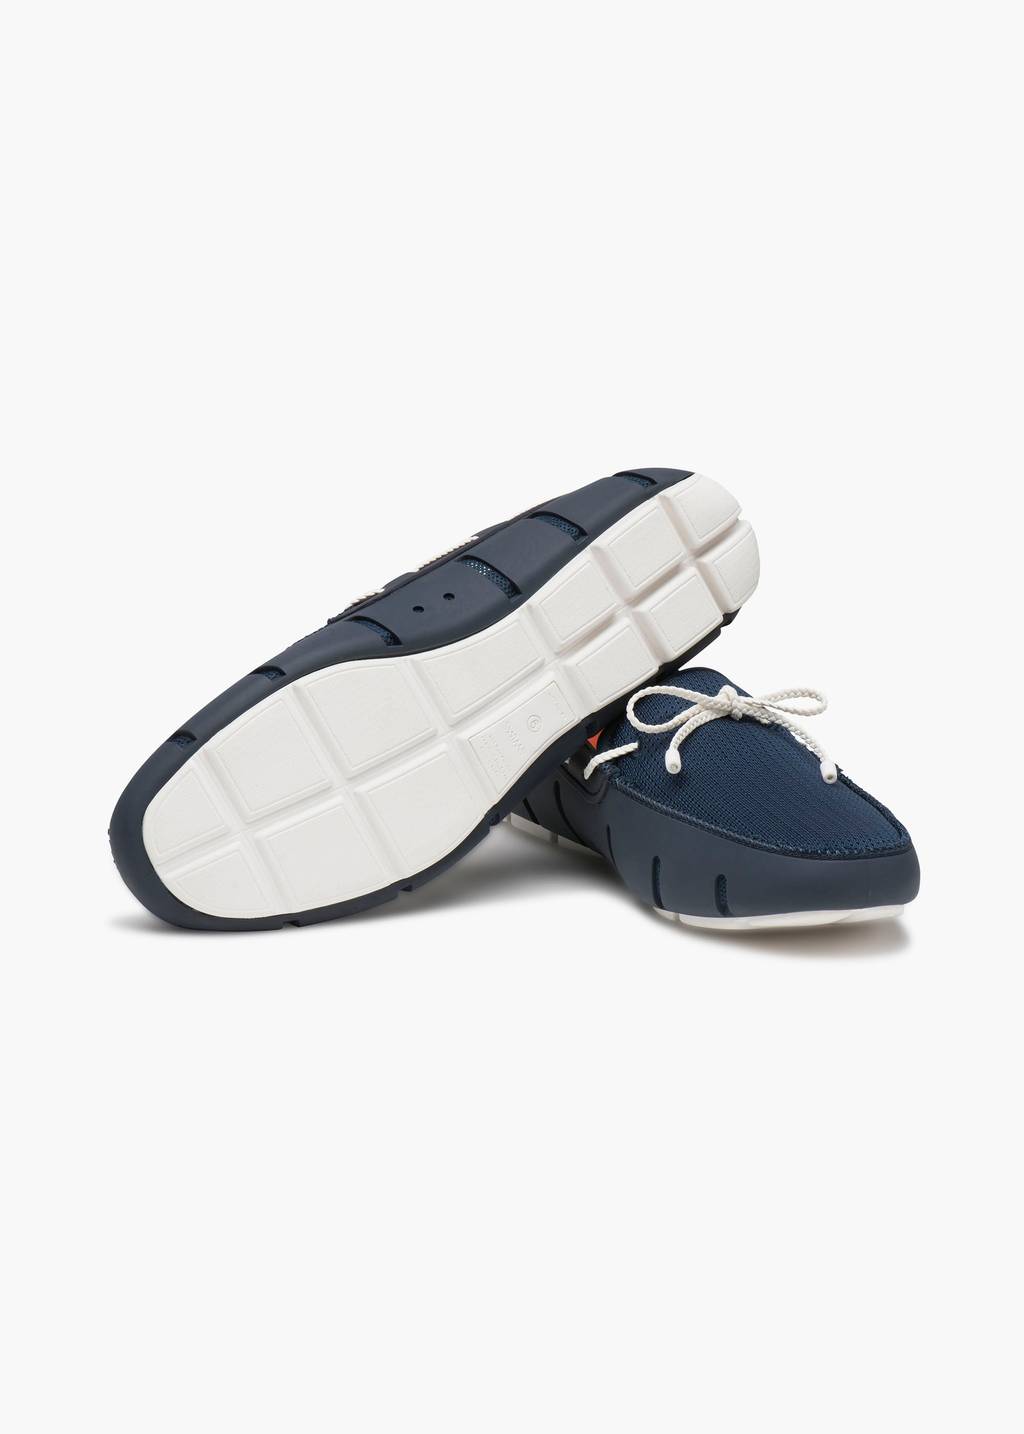 Swims | Le mocassin ''Braided Lace'' - Marine/Blanc